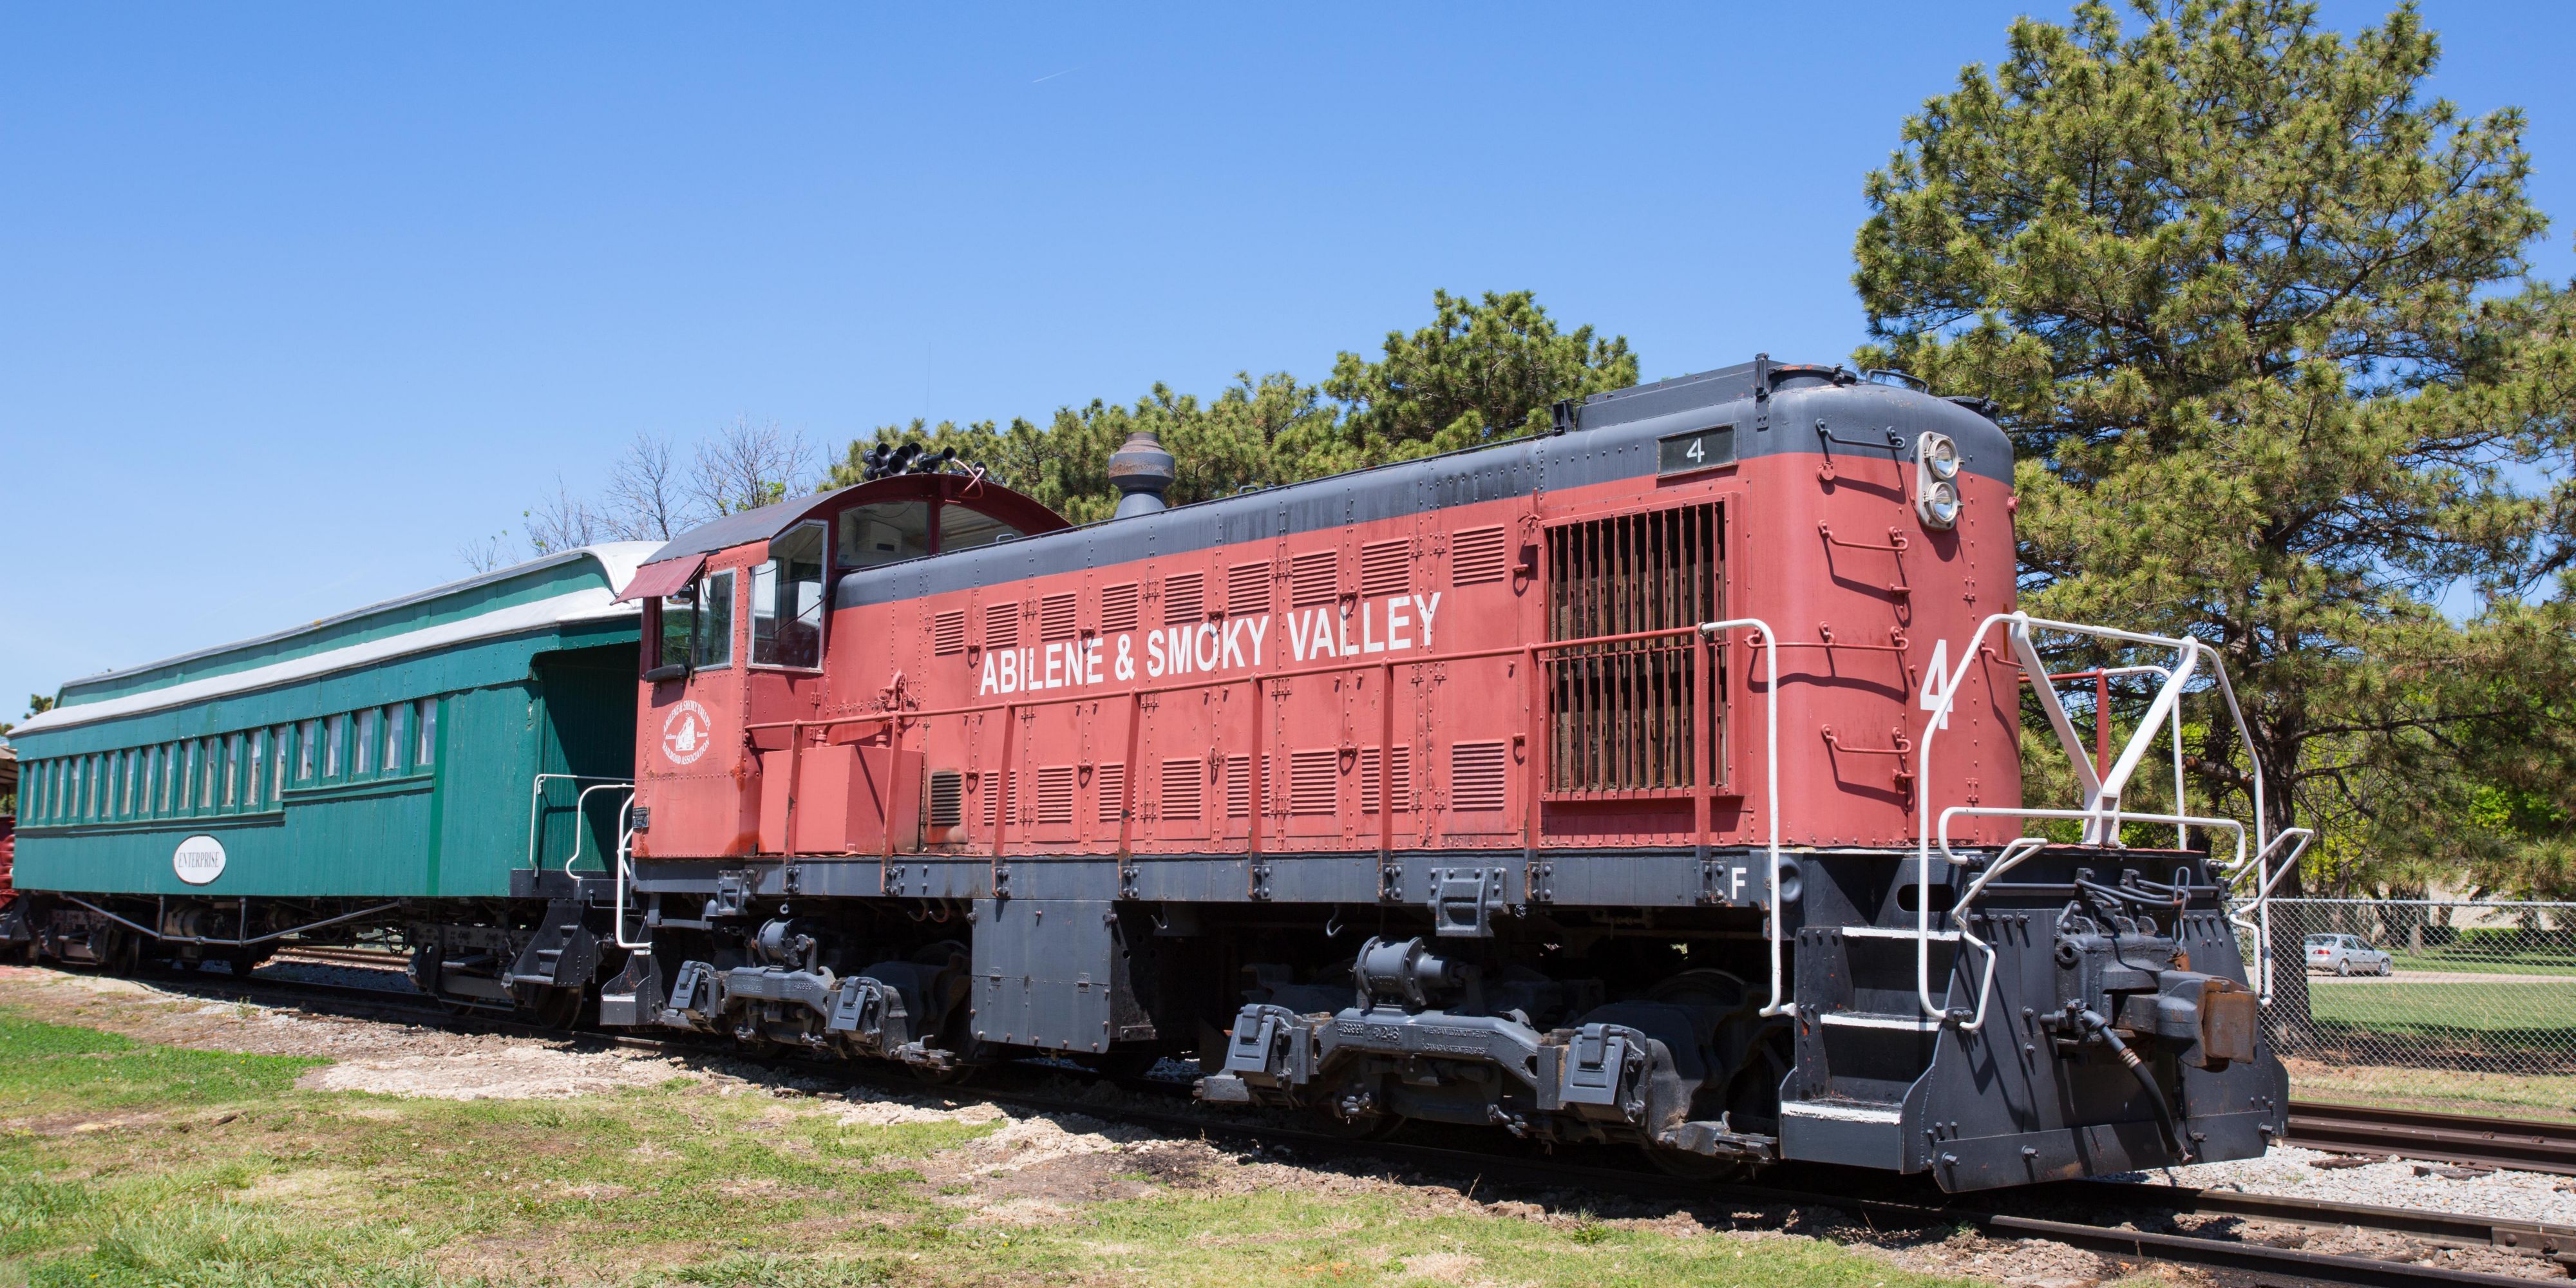 Planning a visit to Abilene May-October? Take a ride on a train at the Abilene & Smoky Valley Railroad, just minutes from our hotel!